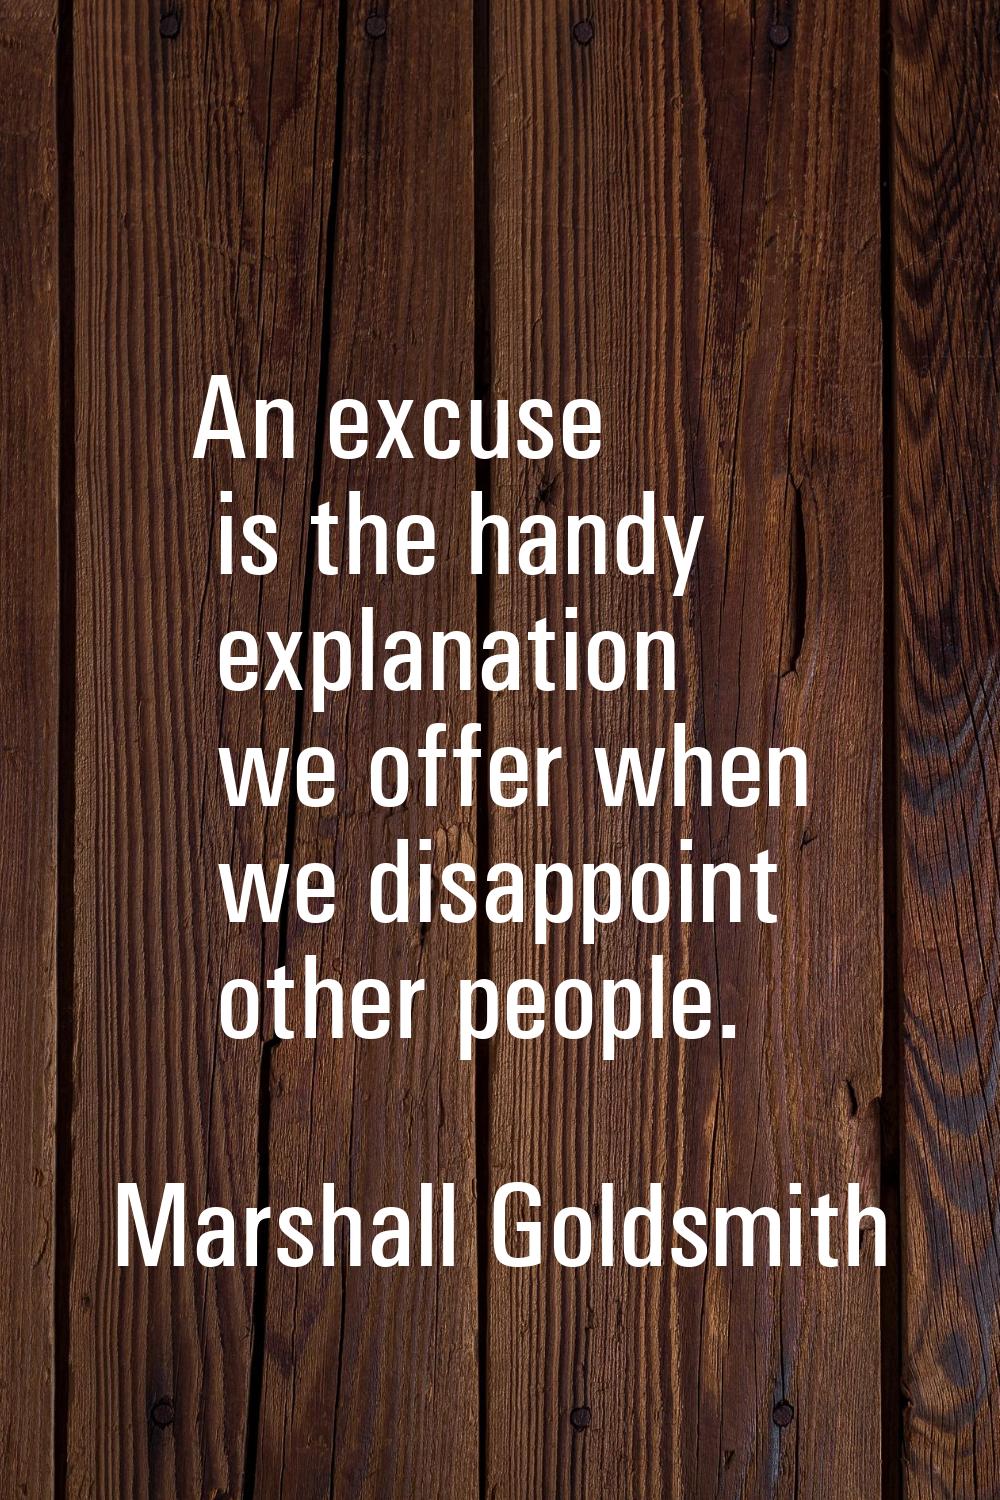 An excuse is the handy explanation we offer when we disappoint other people.